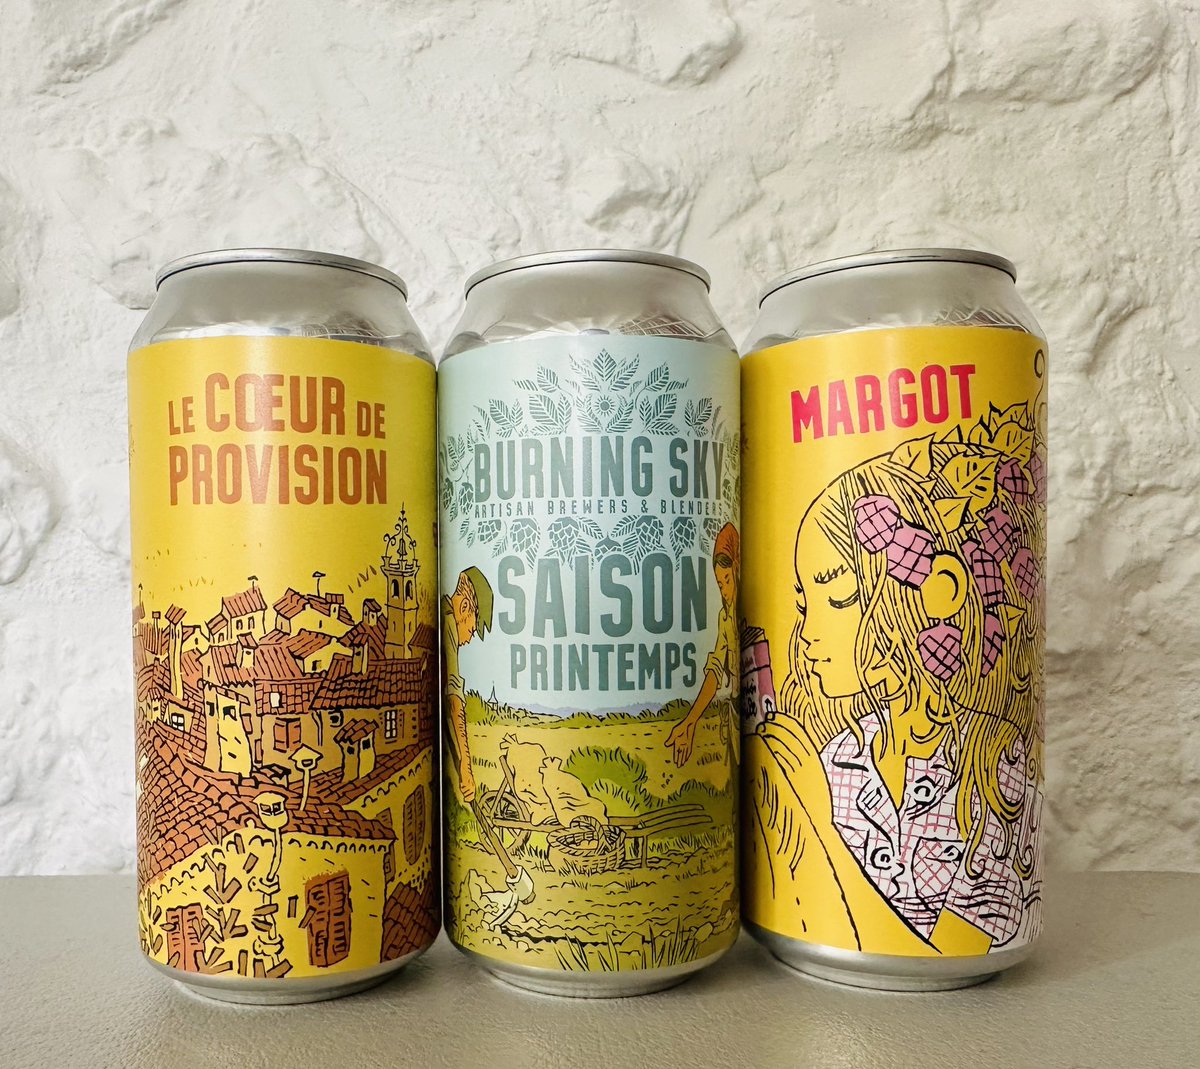 Got three rustic beauties in can on the webshop and heading to trade now: 🍺Le Cœur de Provision🍺 🍺Saison Printemps🍺 🍺Margot🍺 And quite frankly, they’re blimmin lovely Use code SPRING7698 for an awesome xtra 10% off😍😍😍😍😍😍😍😍😍😍😍